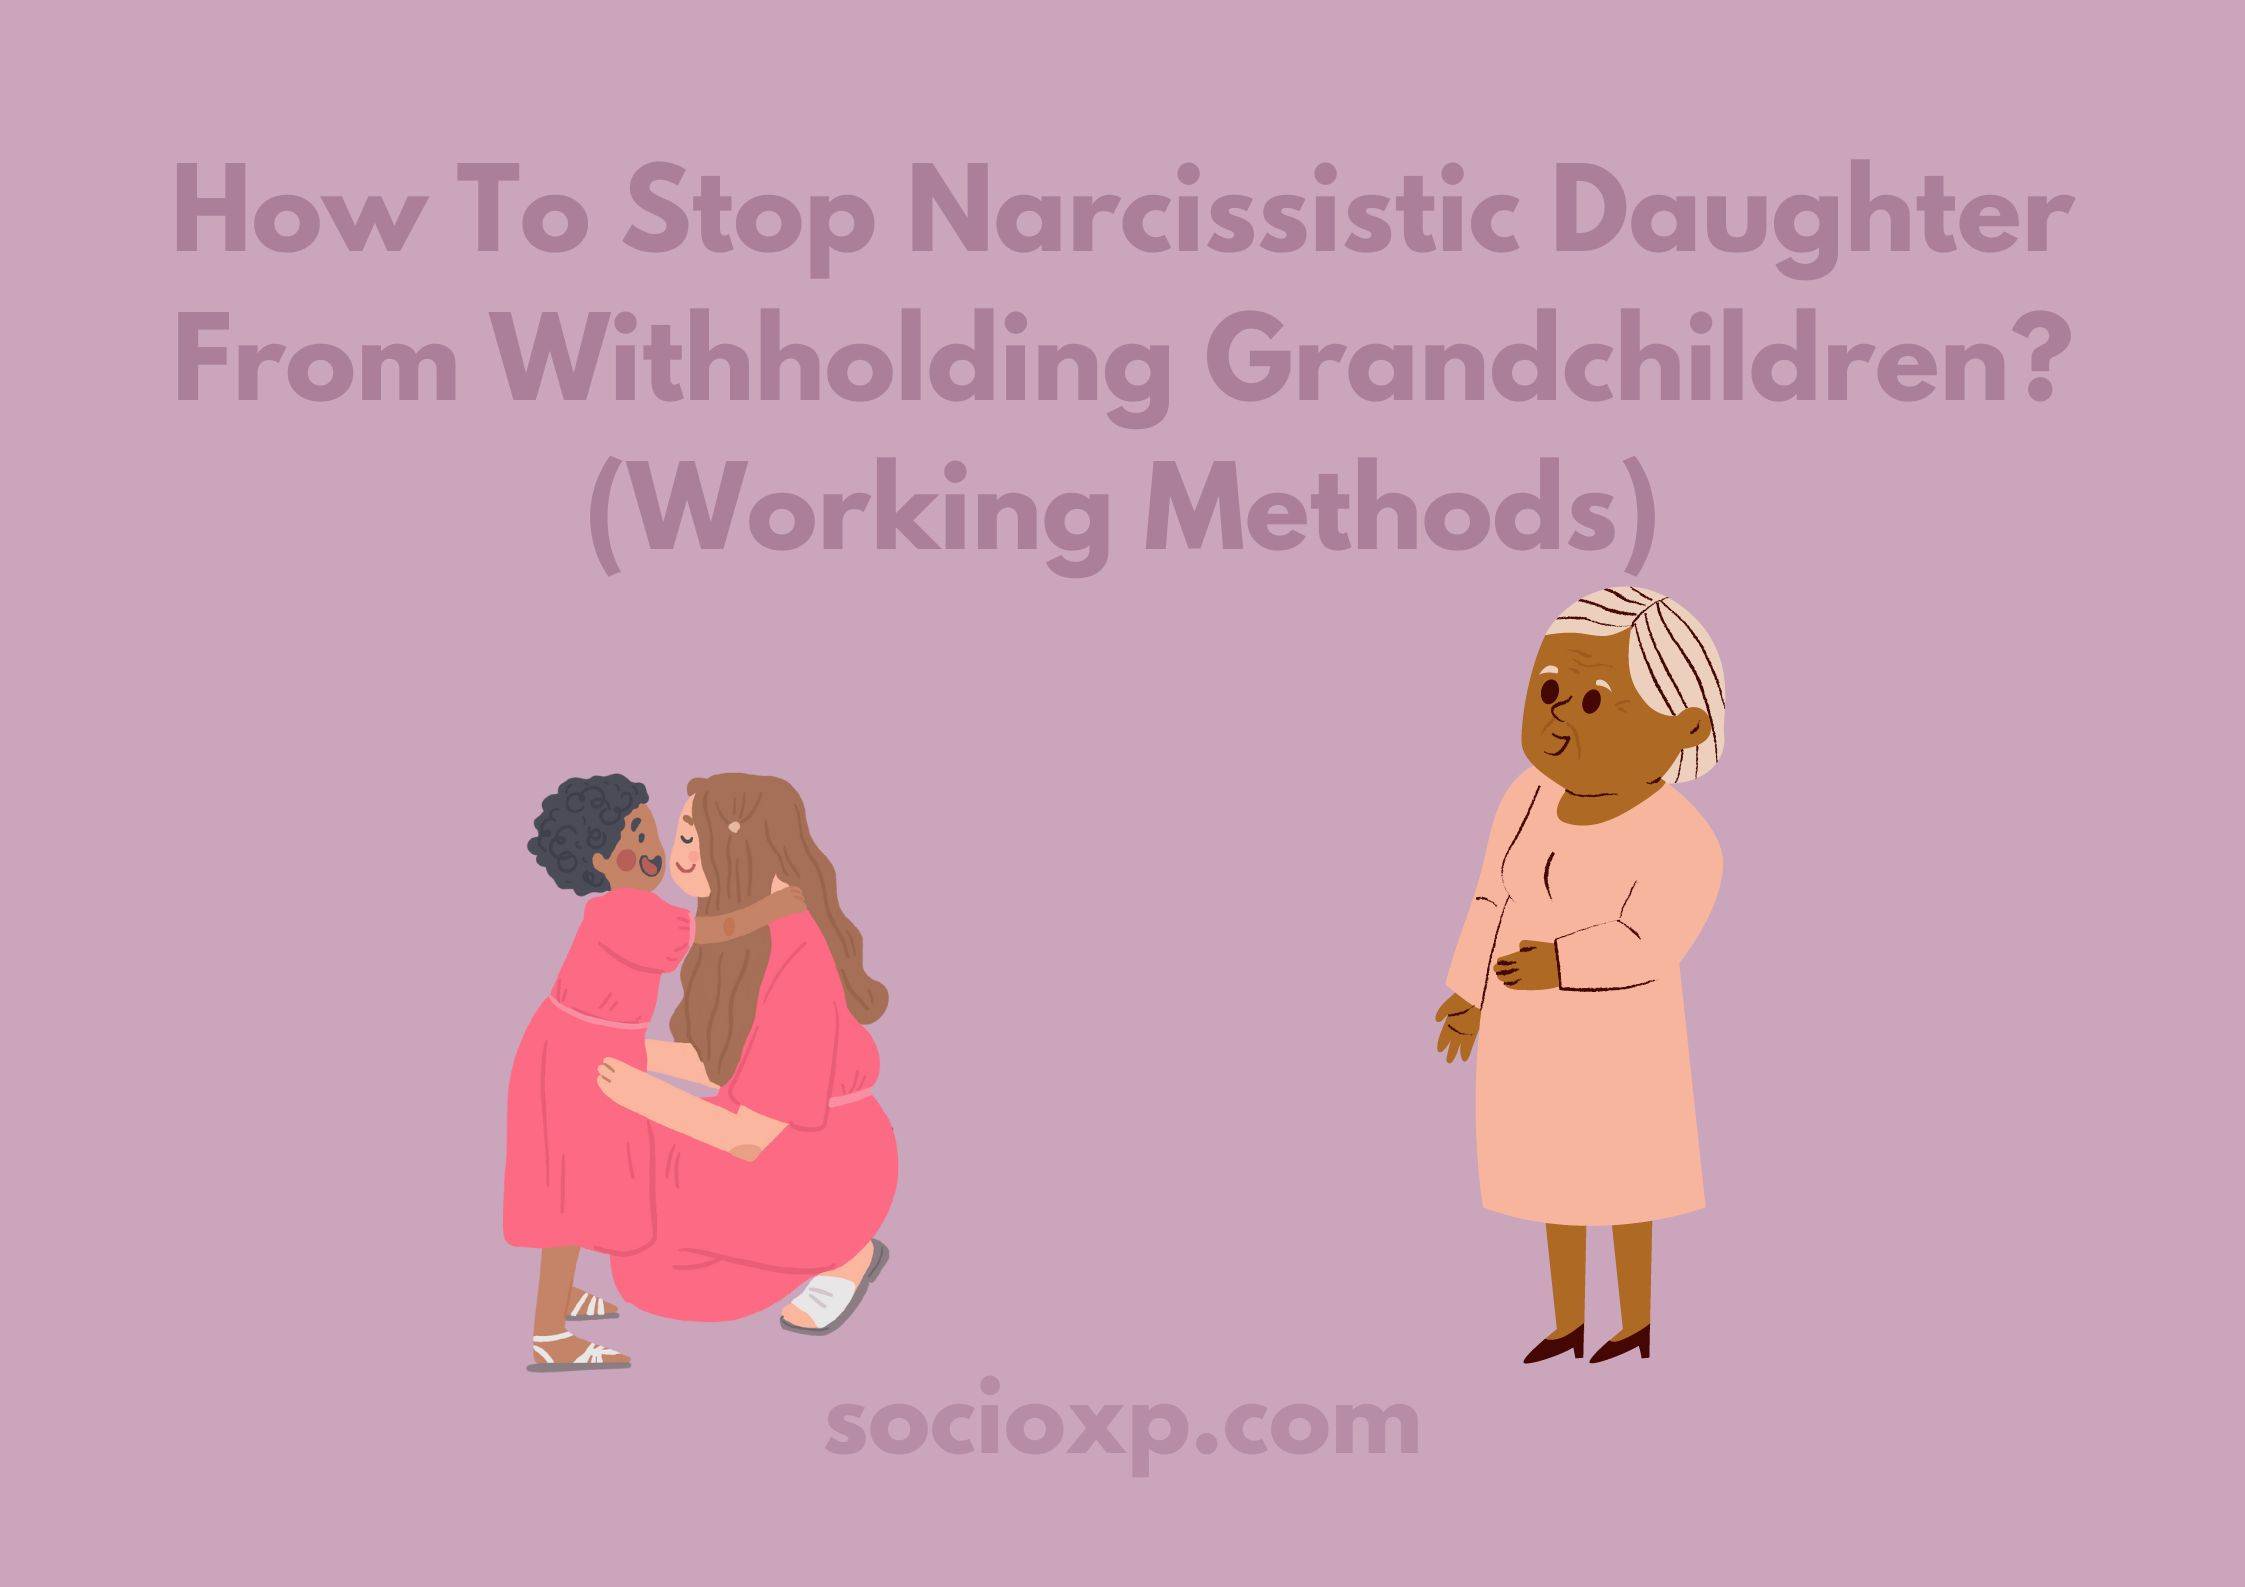 How To Stop Narcissistic Daughter From Withholding Grandchildren? (Working Methods)